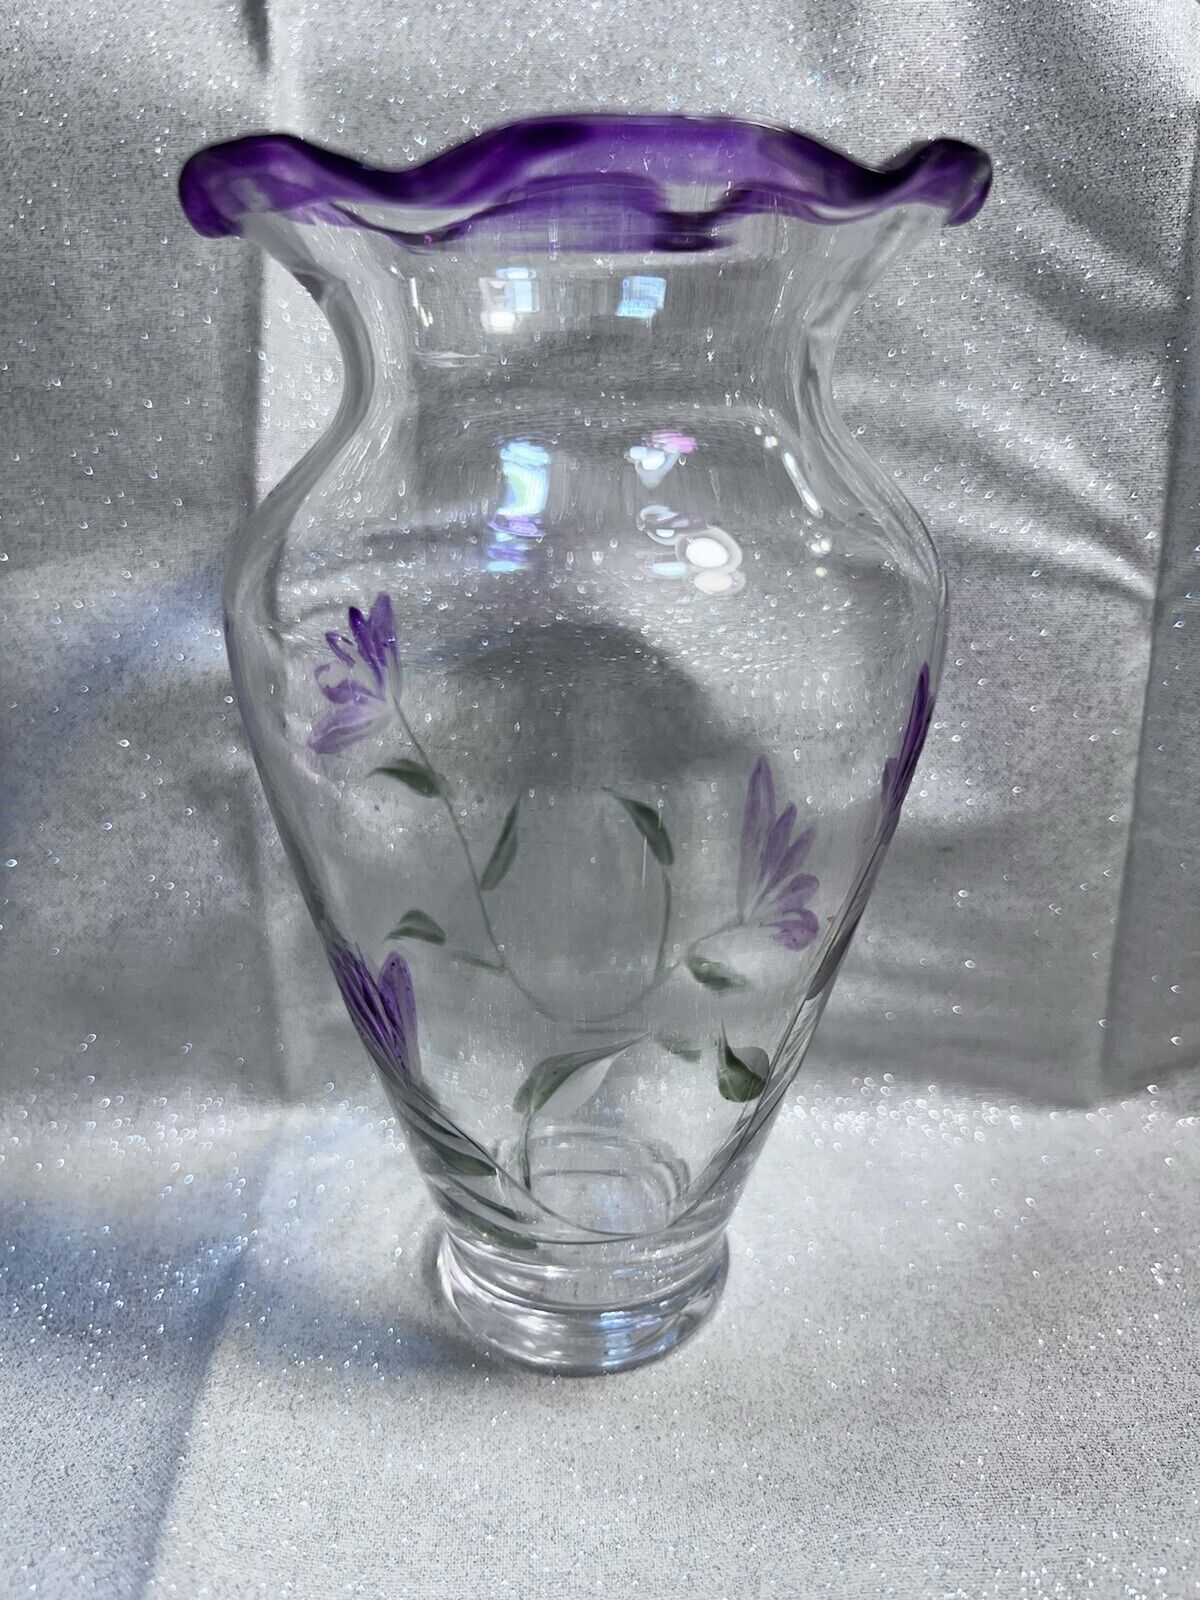 LENOX VASE SCALLOPED RIM ETCHED GLASS HAND PAINTED